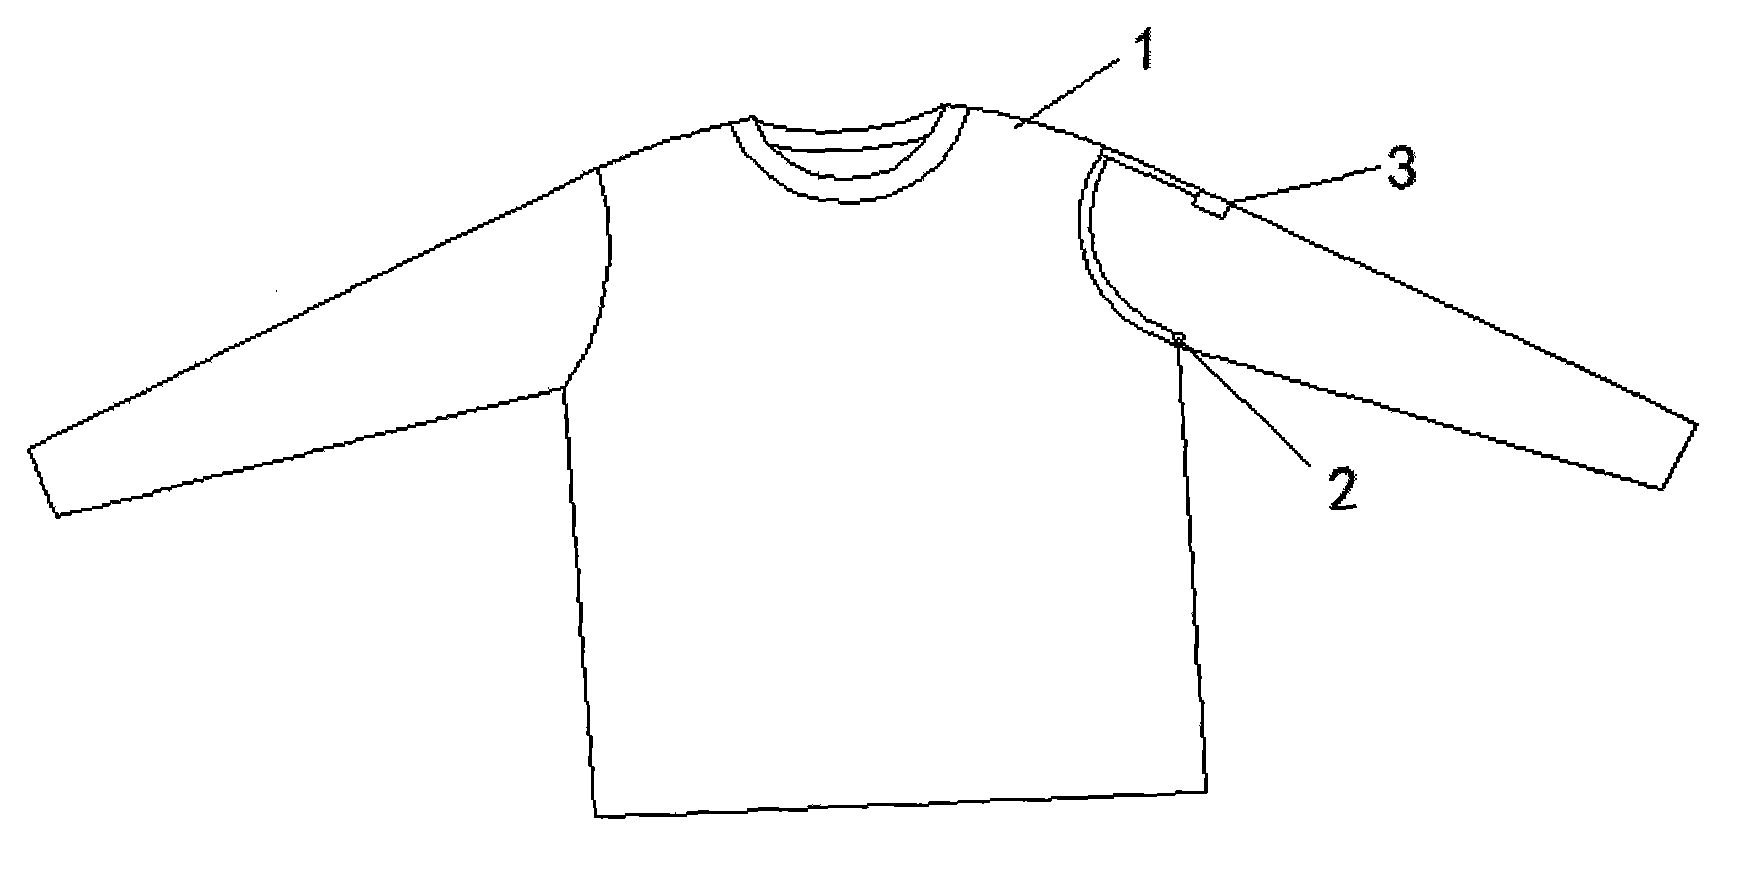 Light transmitting breathable garment provided with thermometer